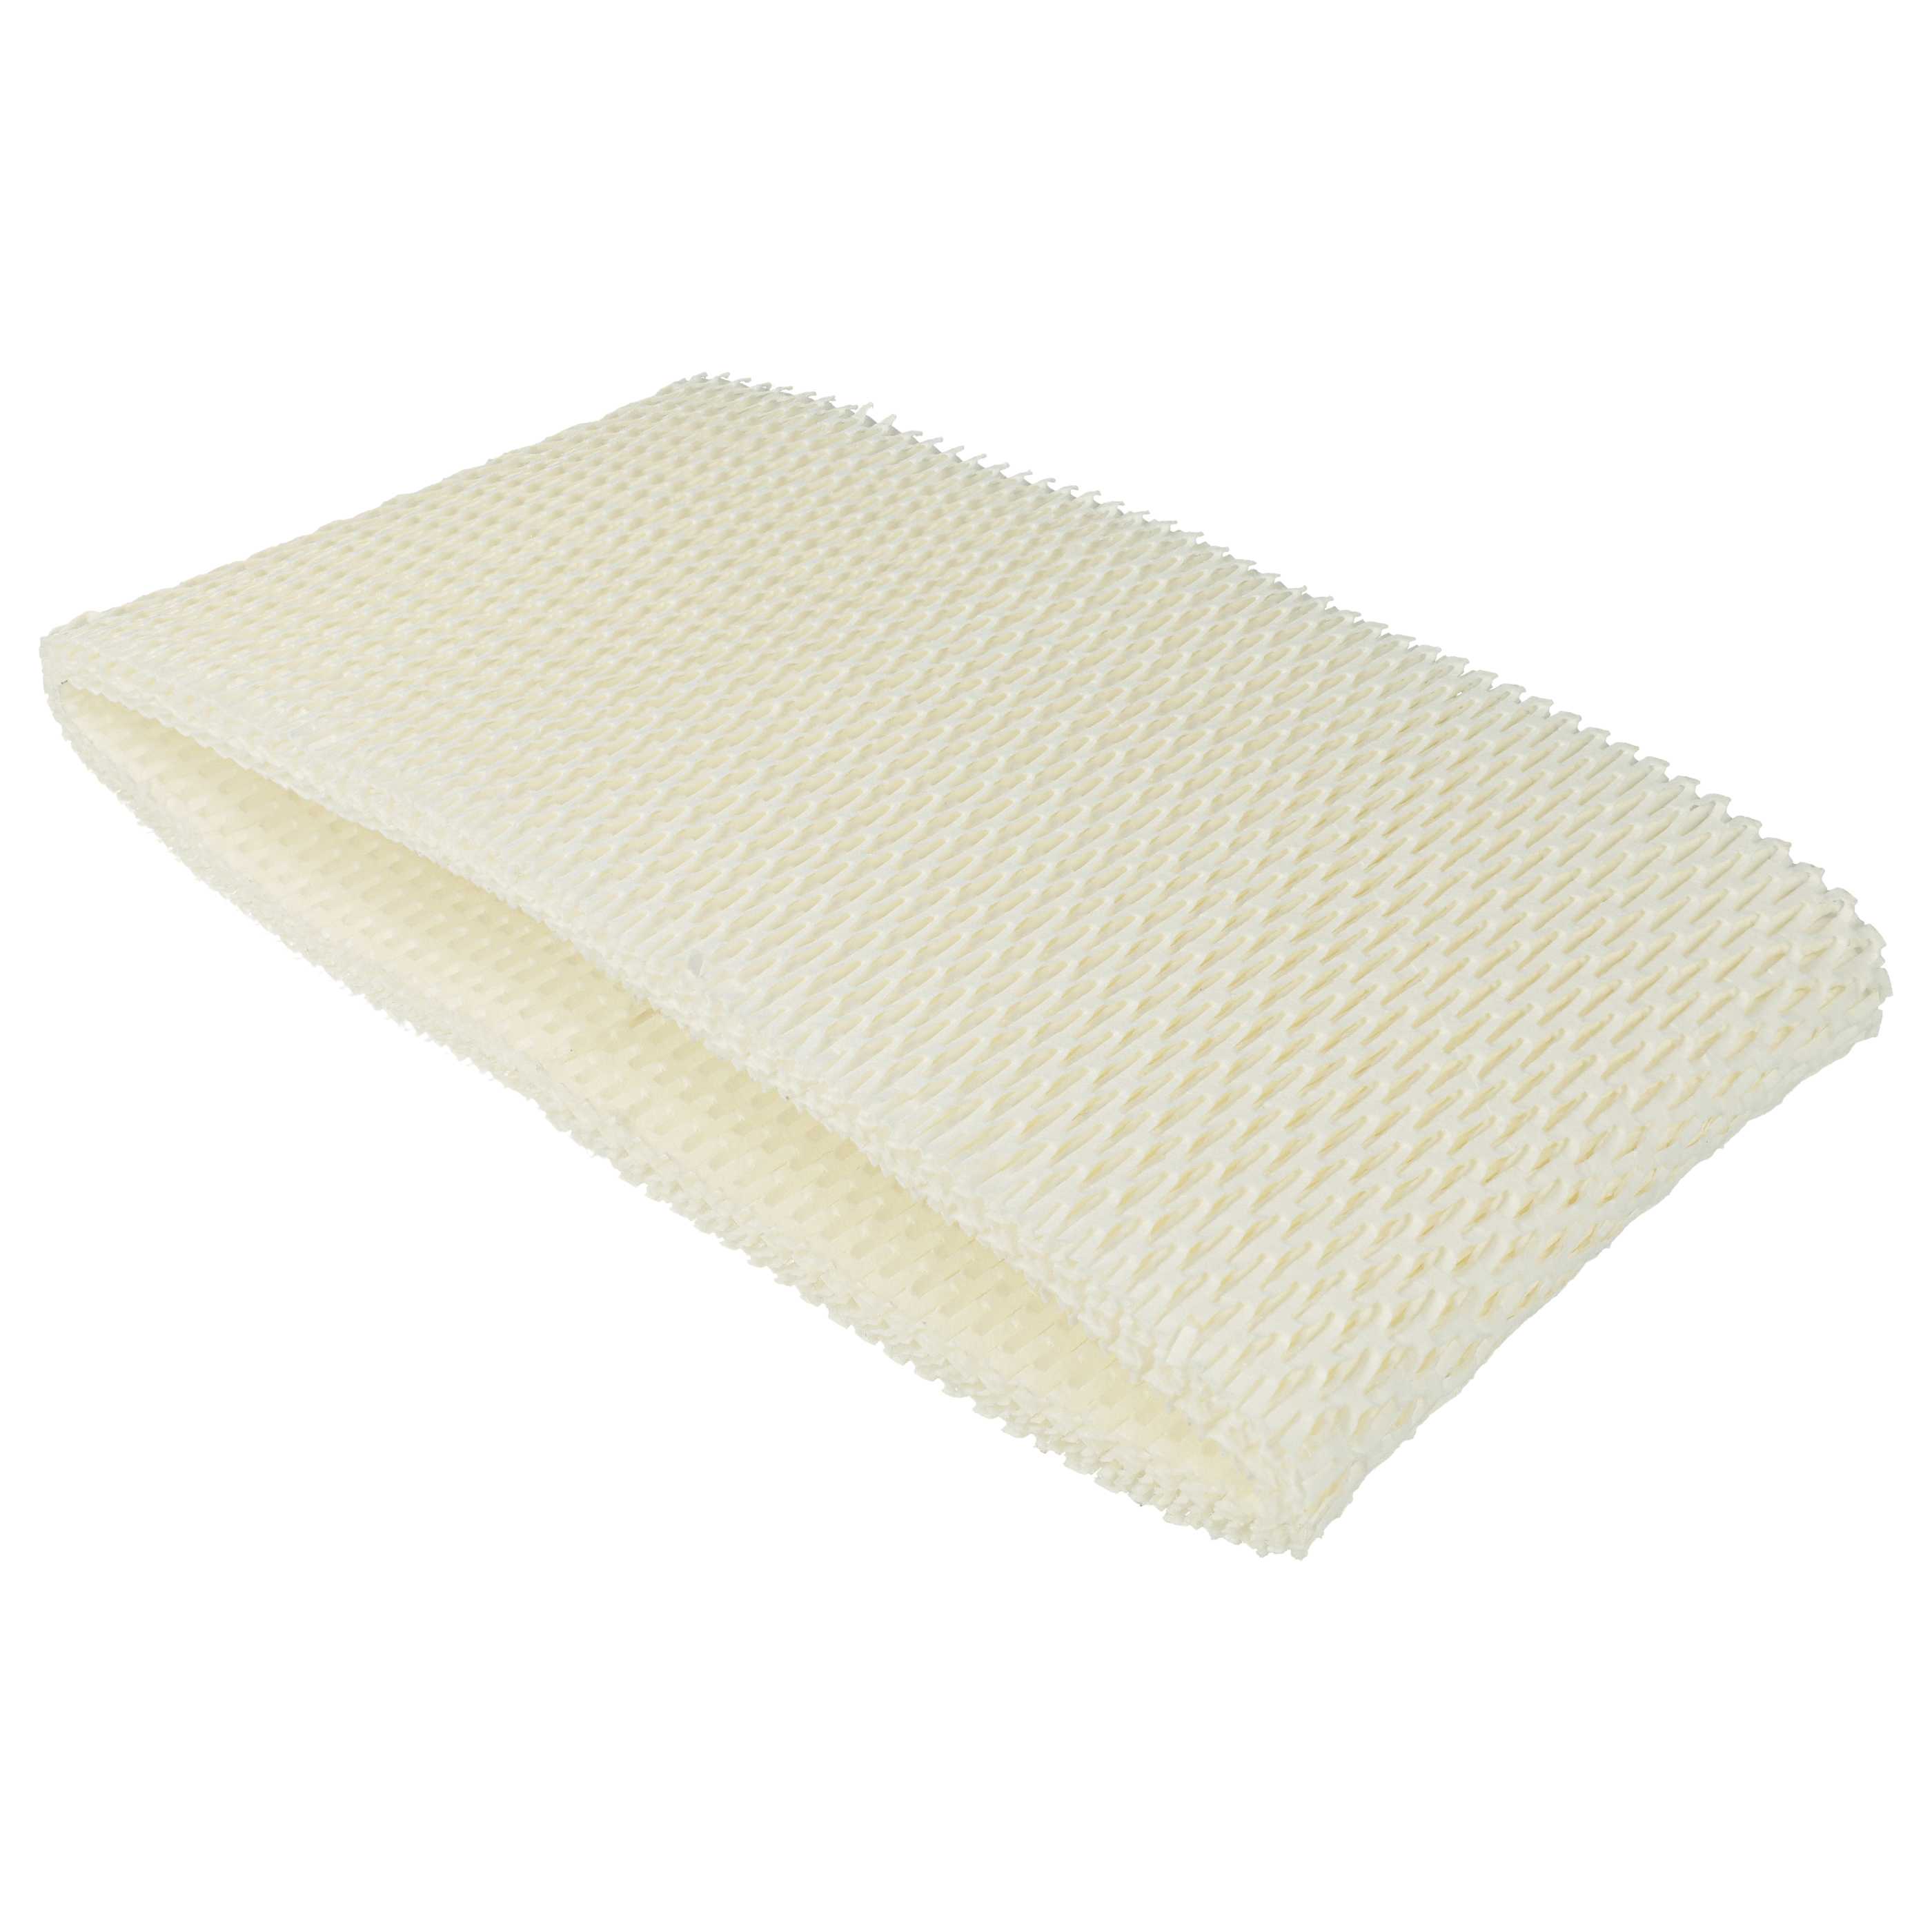 vhbw Wicking Humidifier Filter Replacement for Boneco A7018 for Air Humidifier - Air Filter